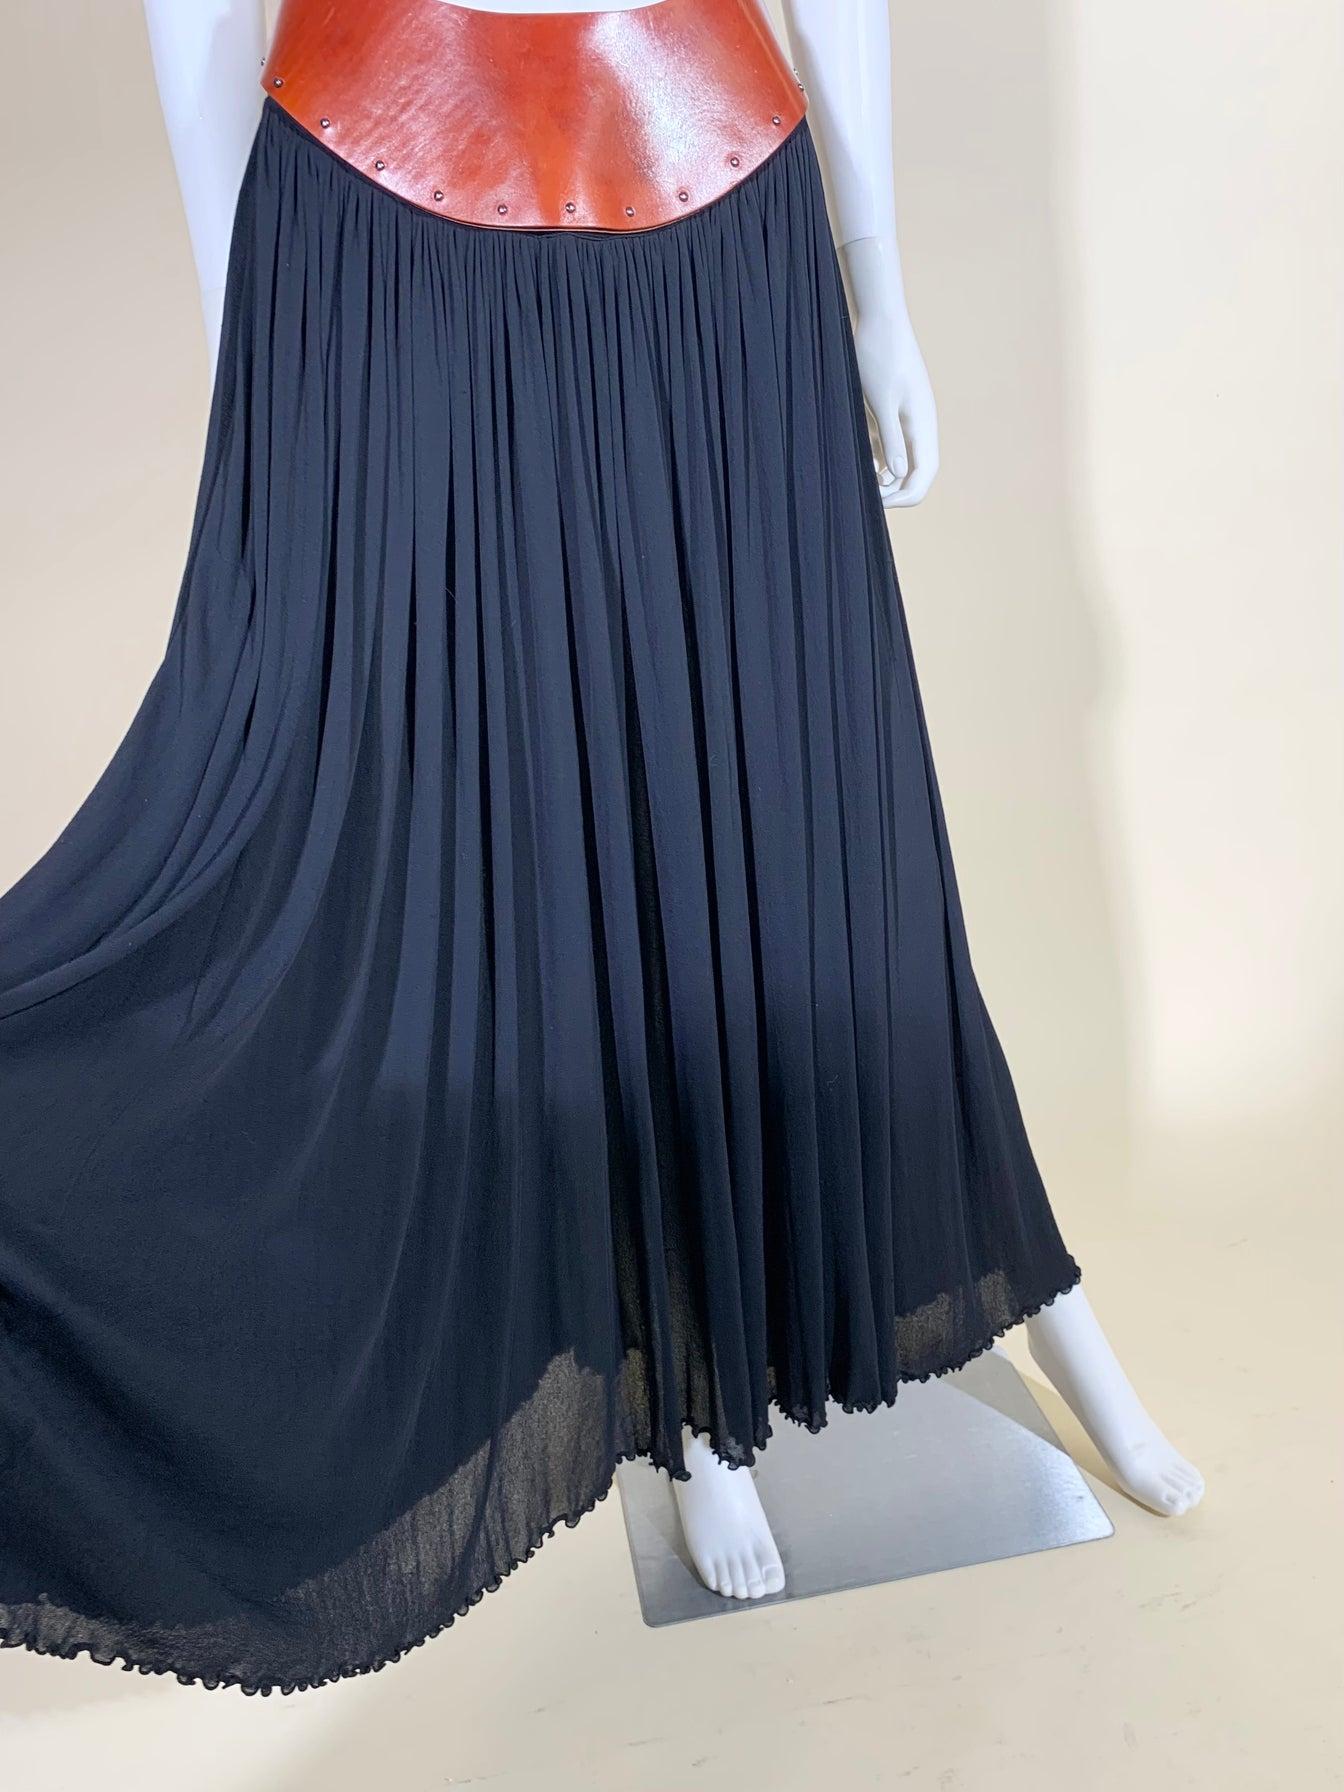 Jean-Paul Gaultier SS 2000 Femme Skirt In Excellent Condition In Avon, CT